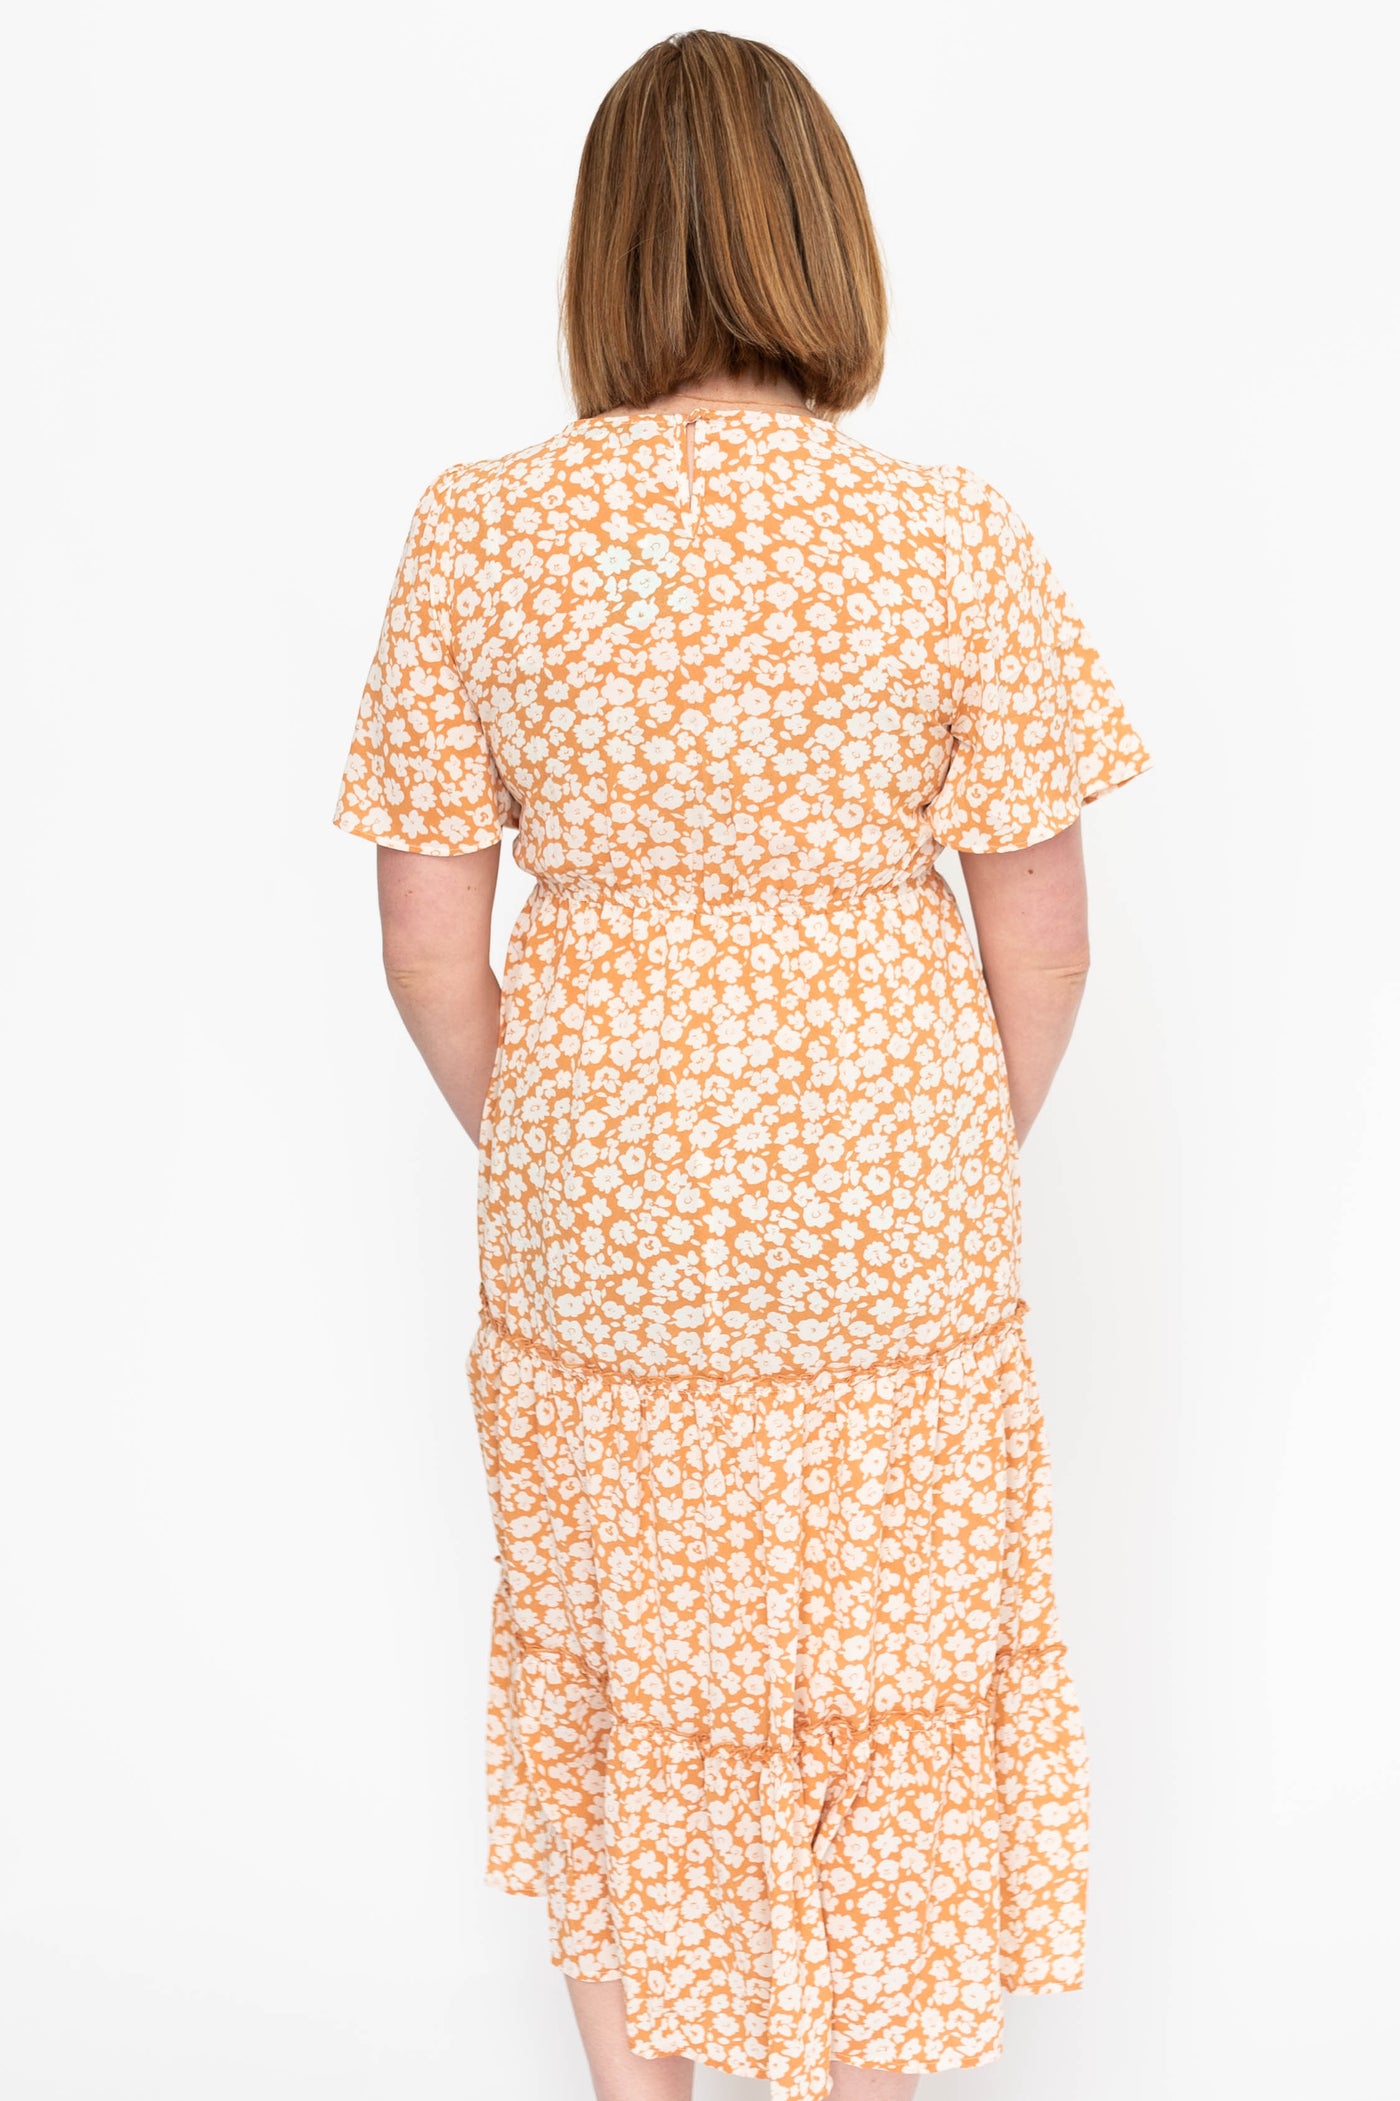 Back view of a apricot dress